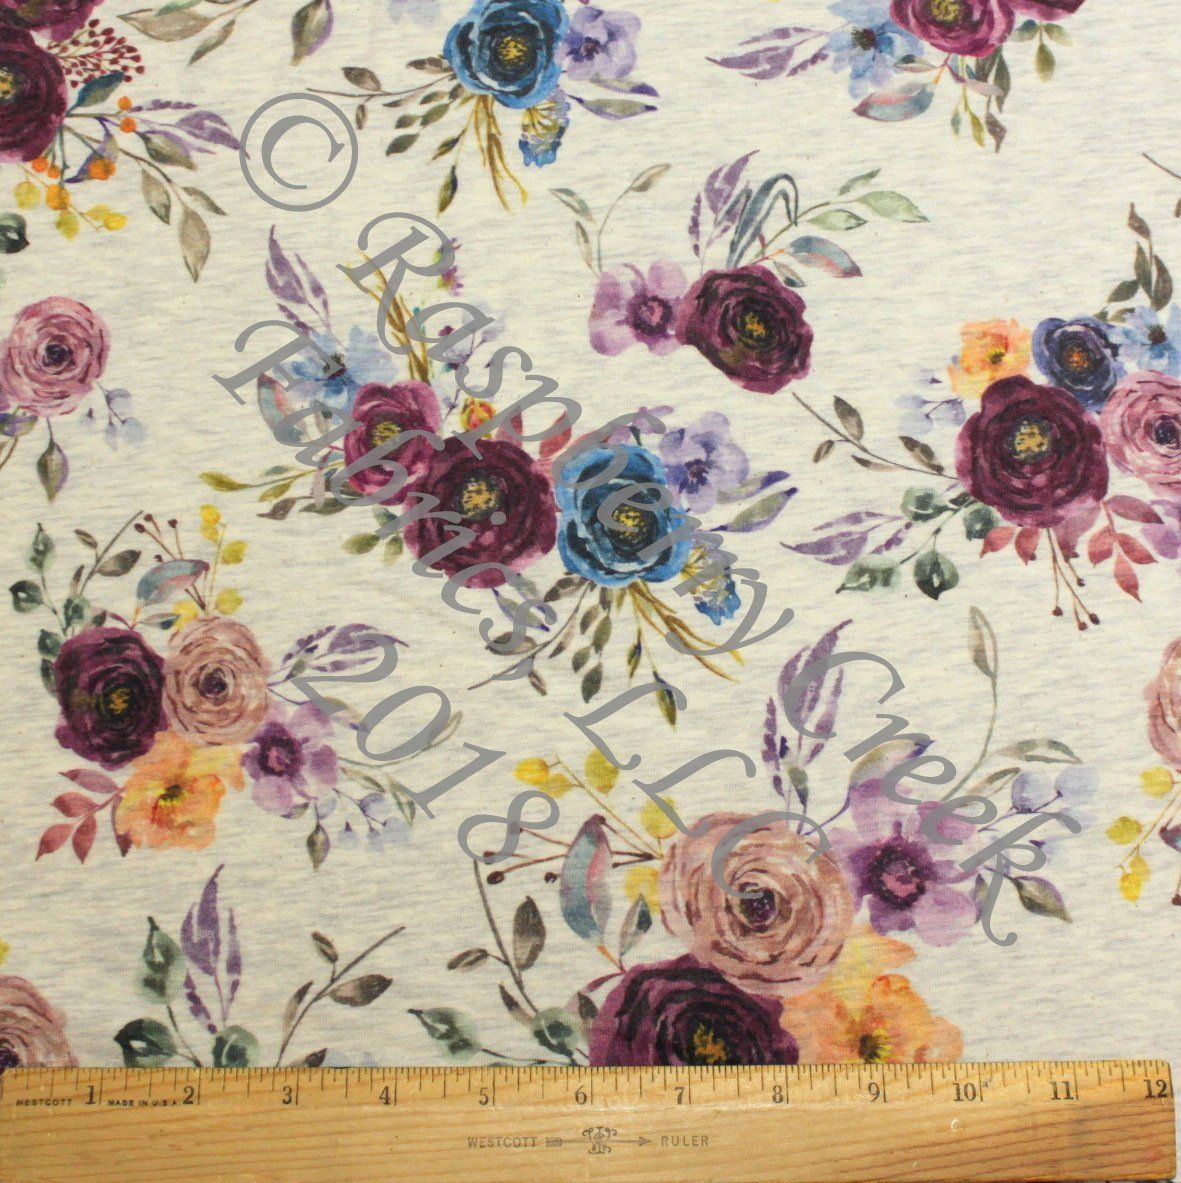 Eggplant Mauve Olive Blue and Peach Watercolor Floral on Oatmeal 4 Way Stretch French Terry Knit Fabric Fabric, Raspberry Creek Fabrics, watermarked, restored